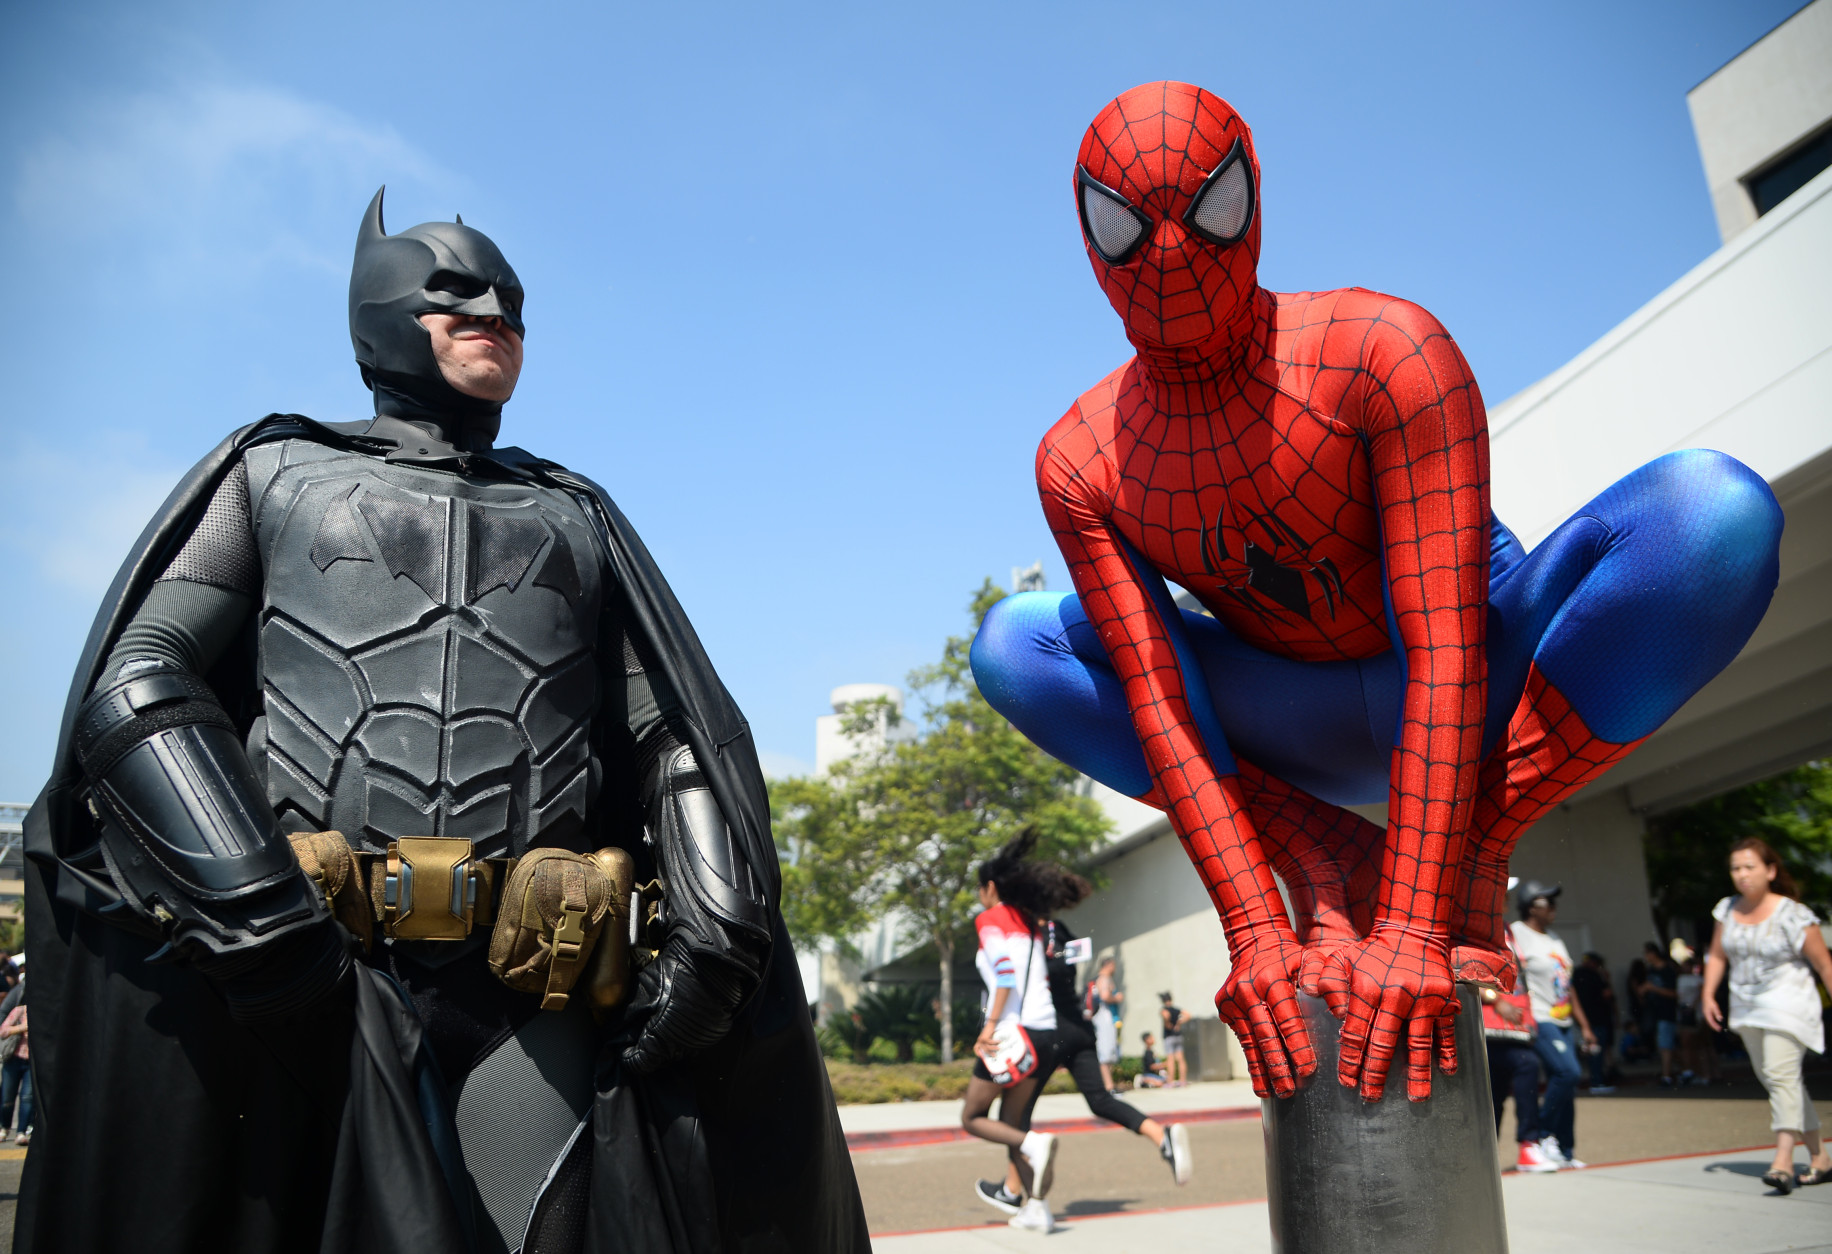 Dorian Black, left, dressed as Batman and Kyle Blankenfield as Spiderman on day 3 of Comic-Con International on Saturday, July 23, 2016, in San Diego. (Photo by Al Powers/Invision/AP)